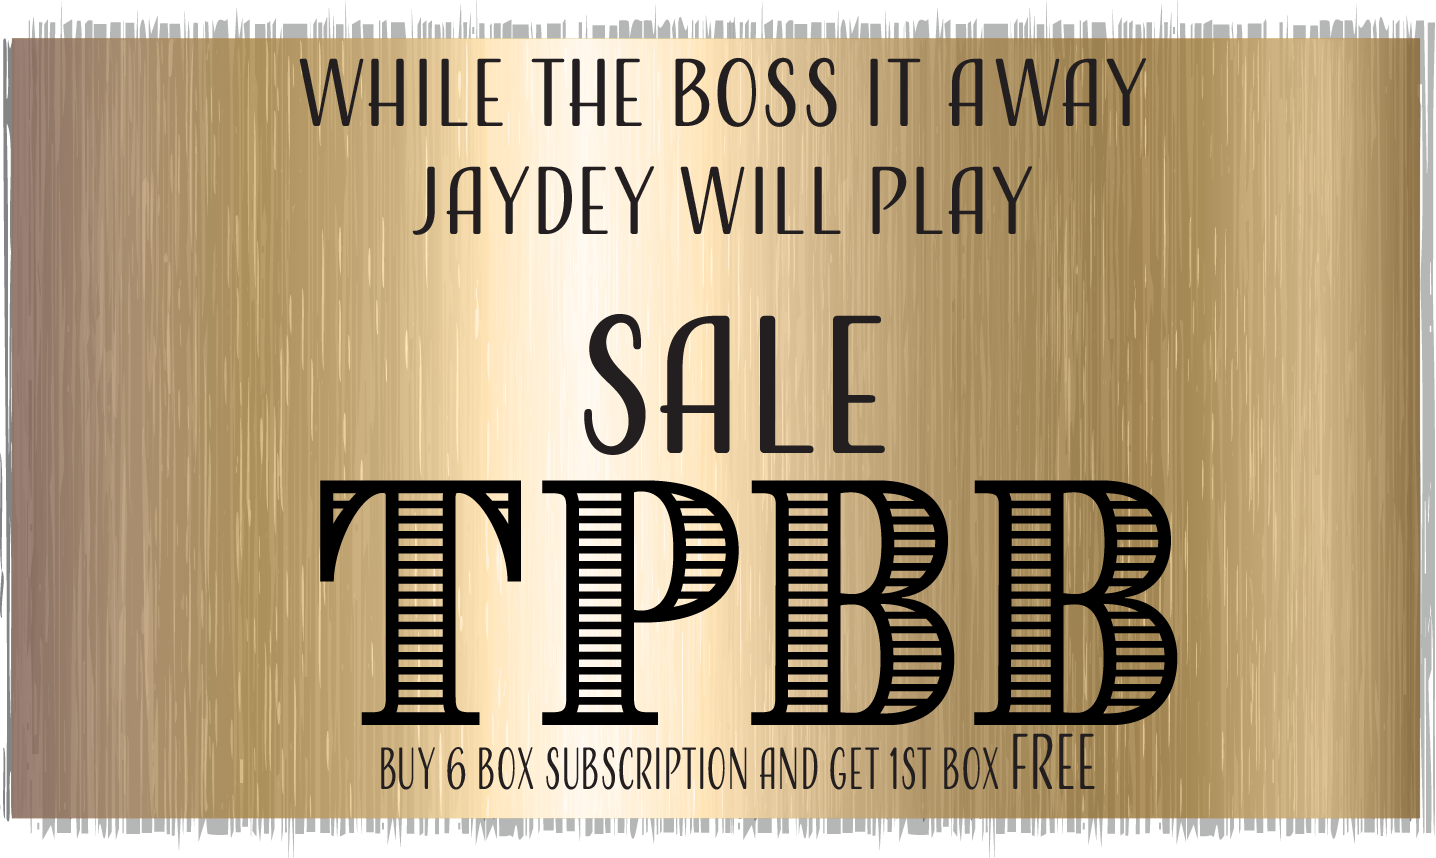 While to Boss is Away SALE - TPBB